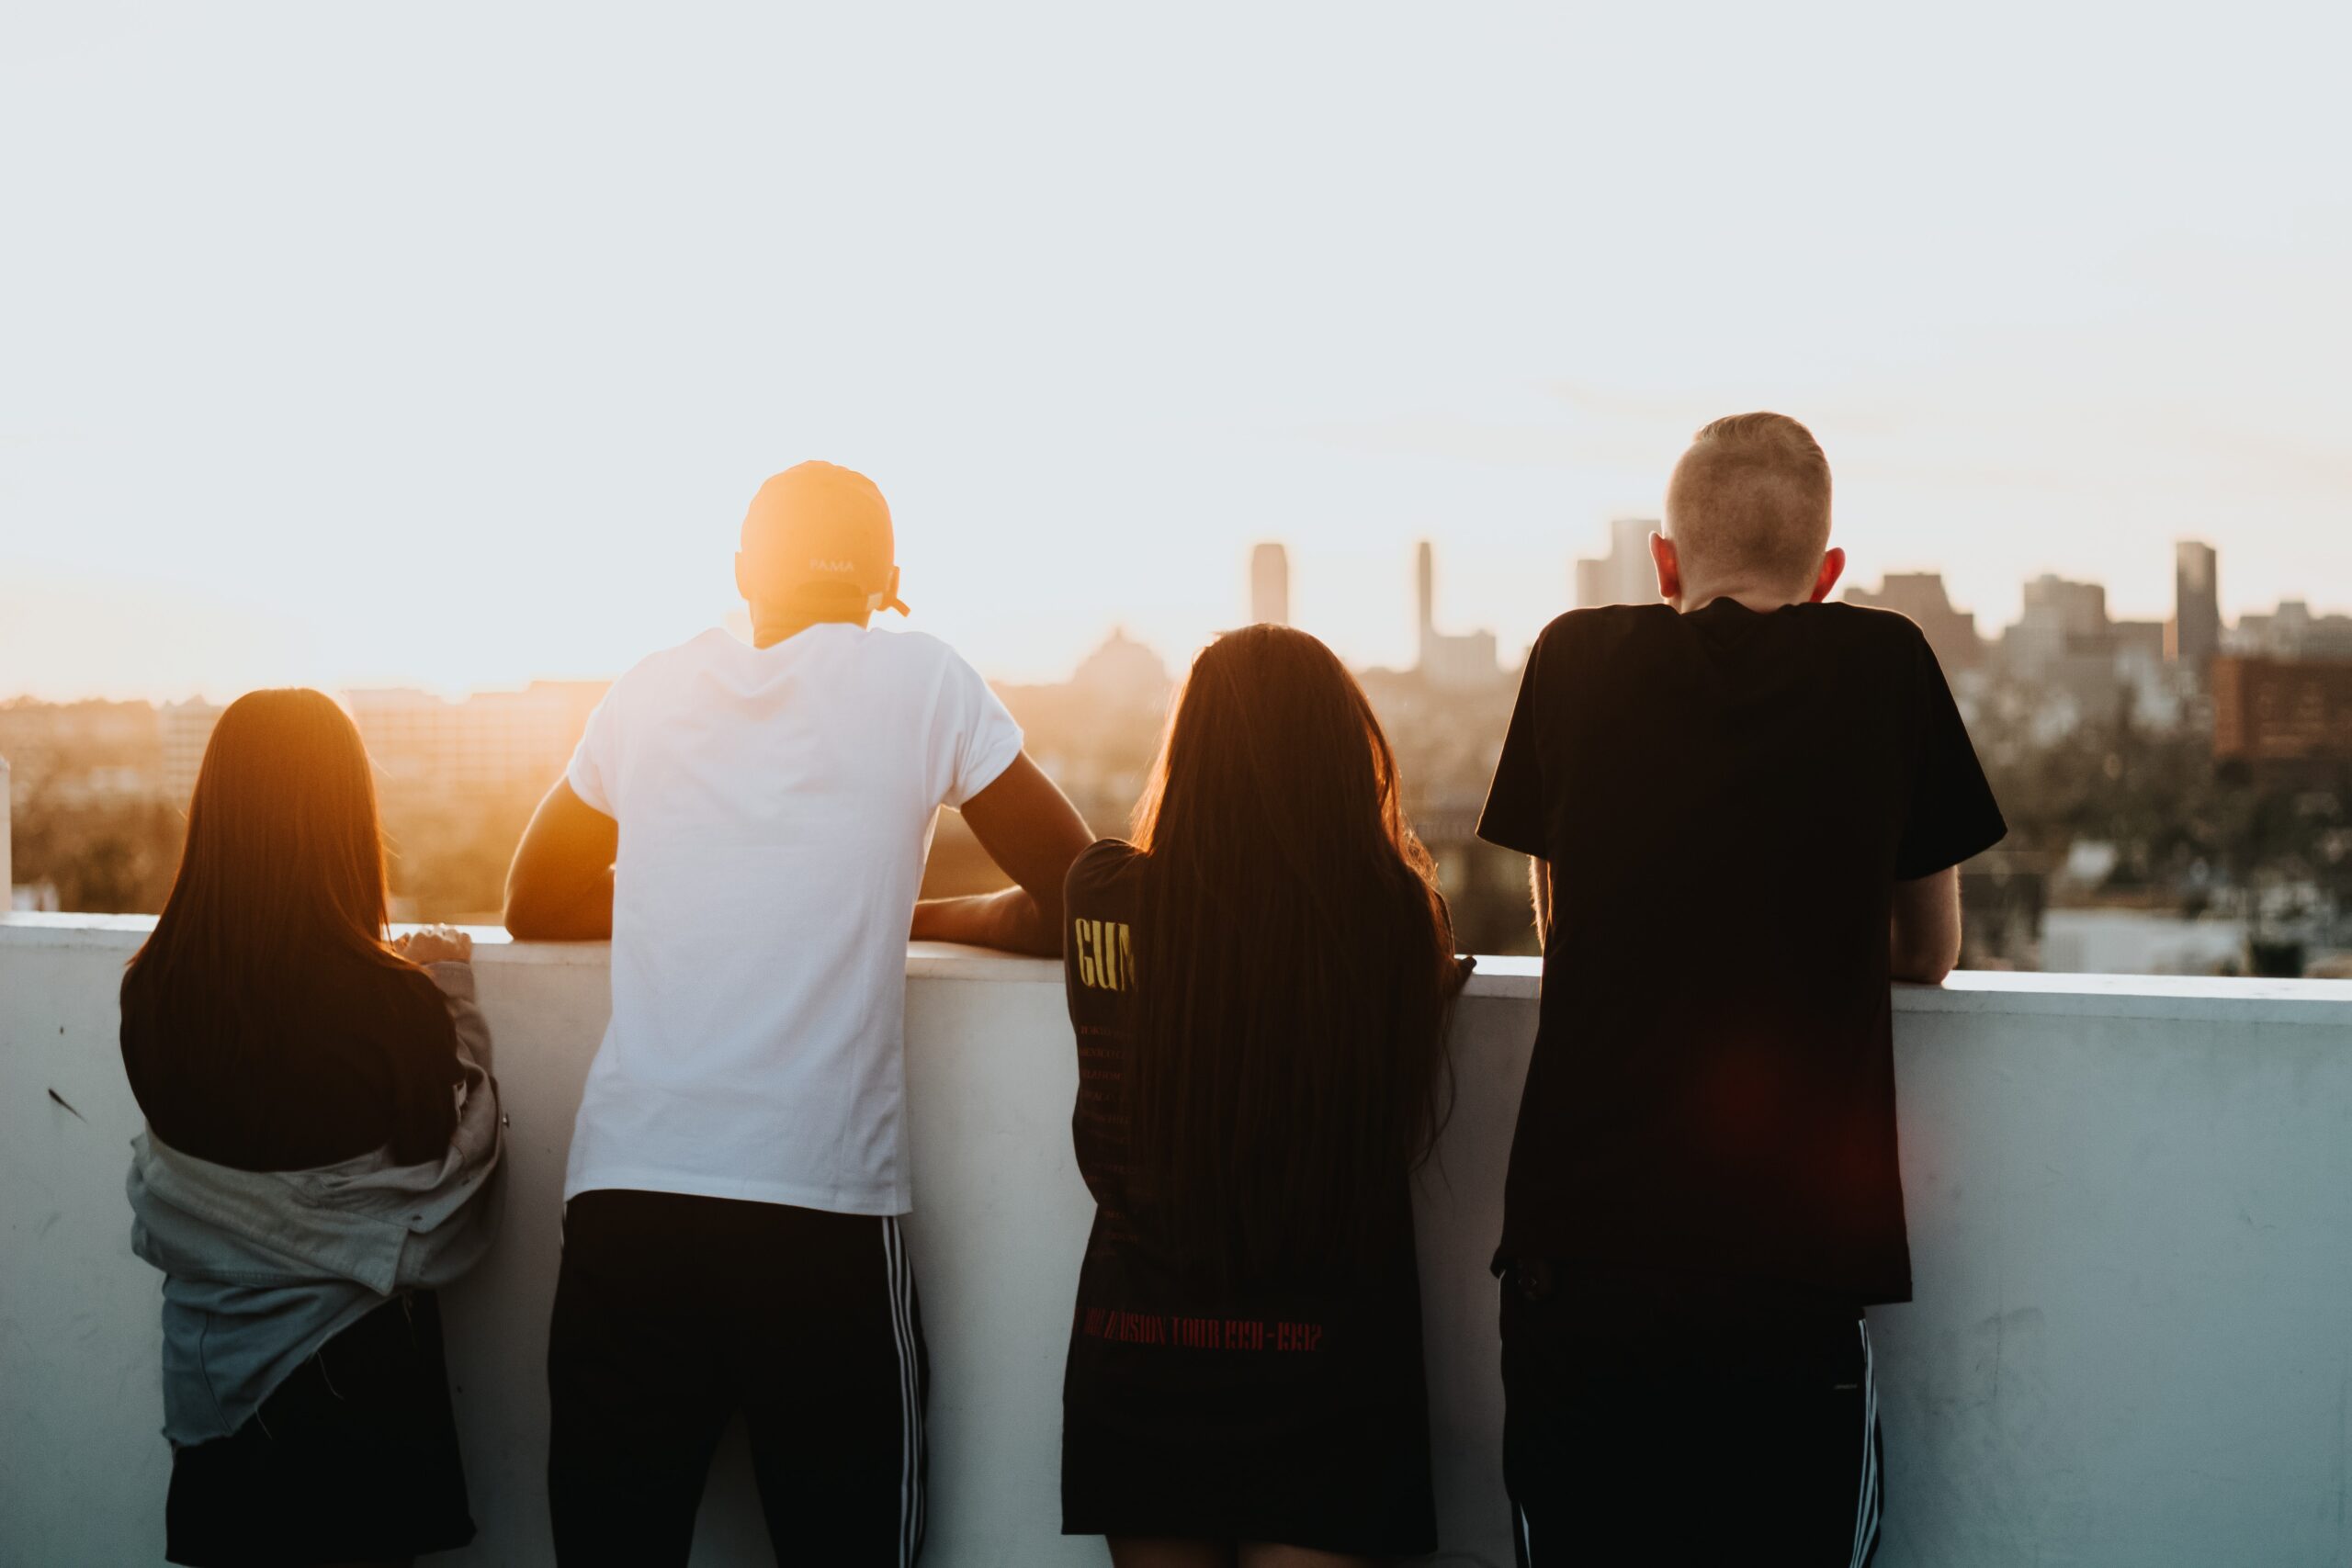 Four young people look out at a city skyline. Their faces are not in view.